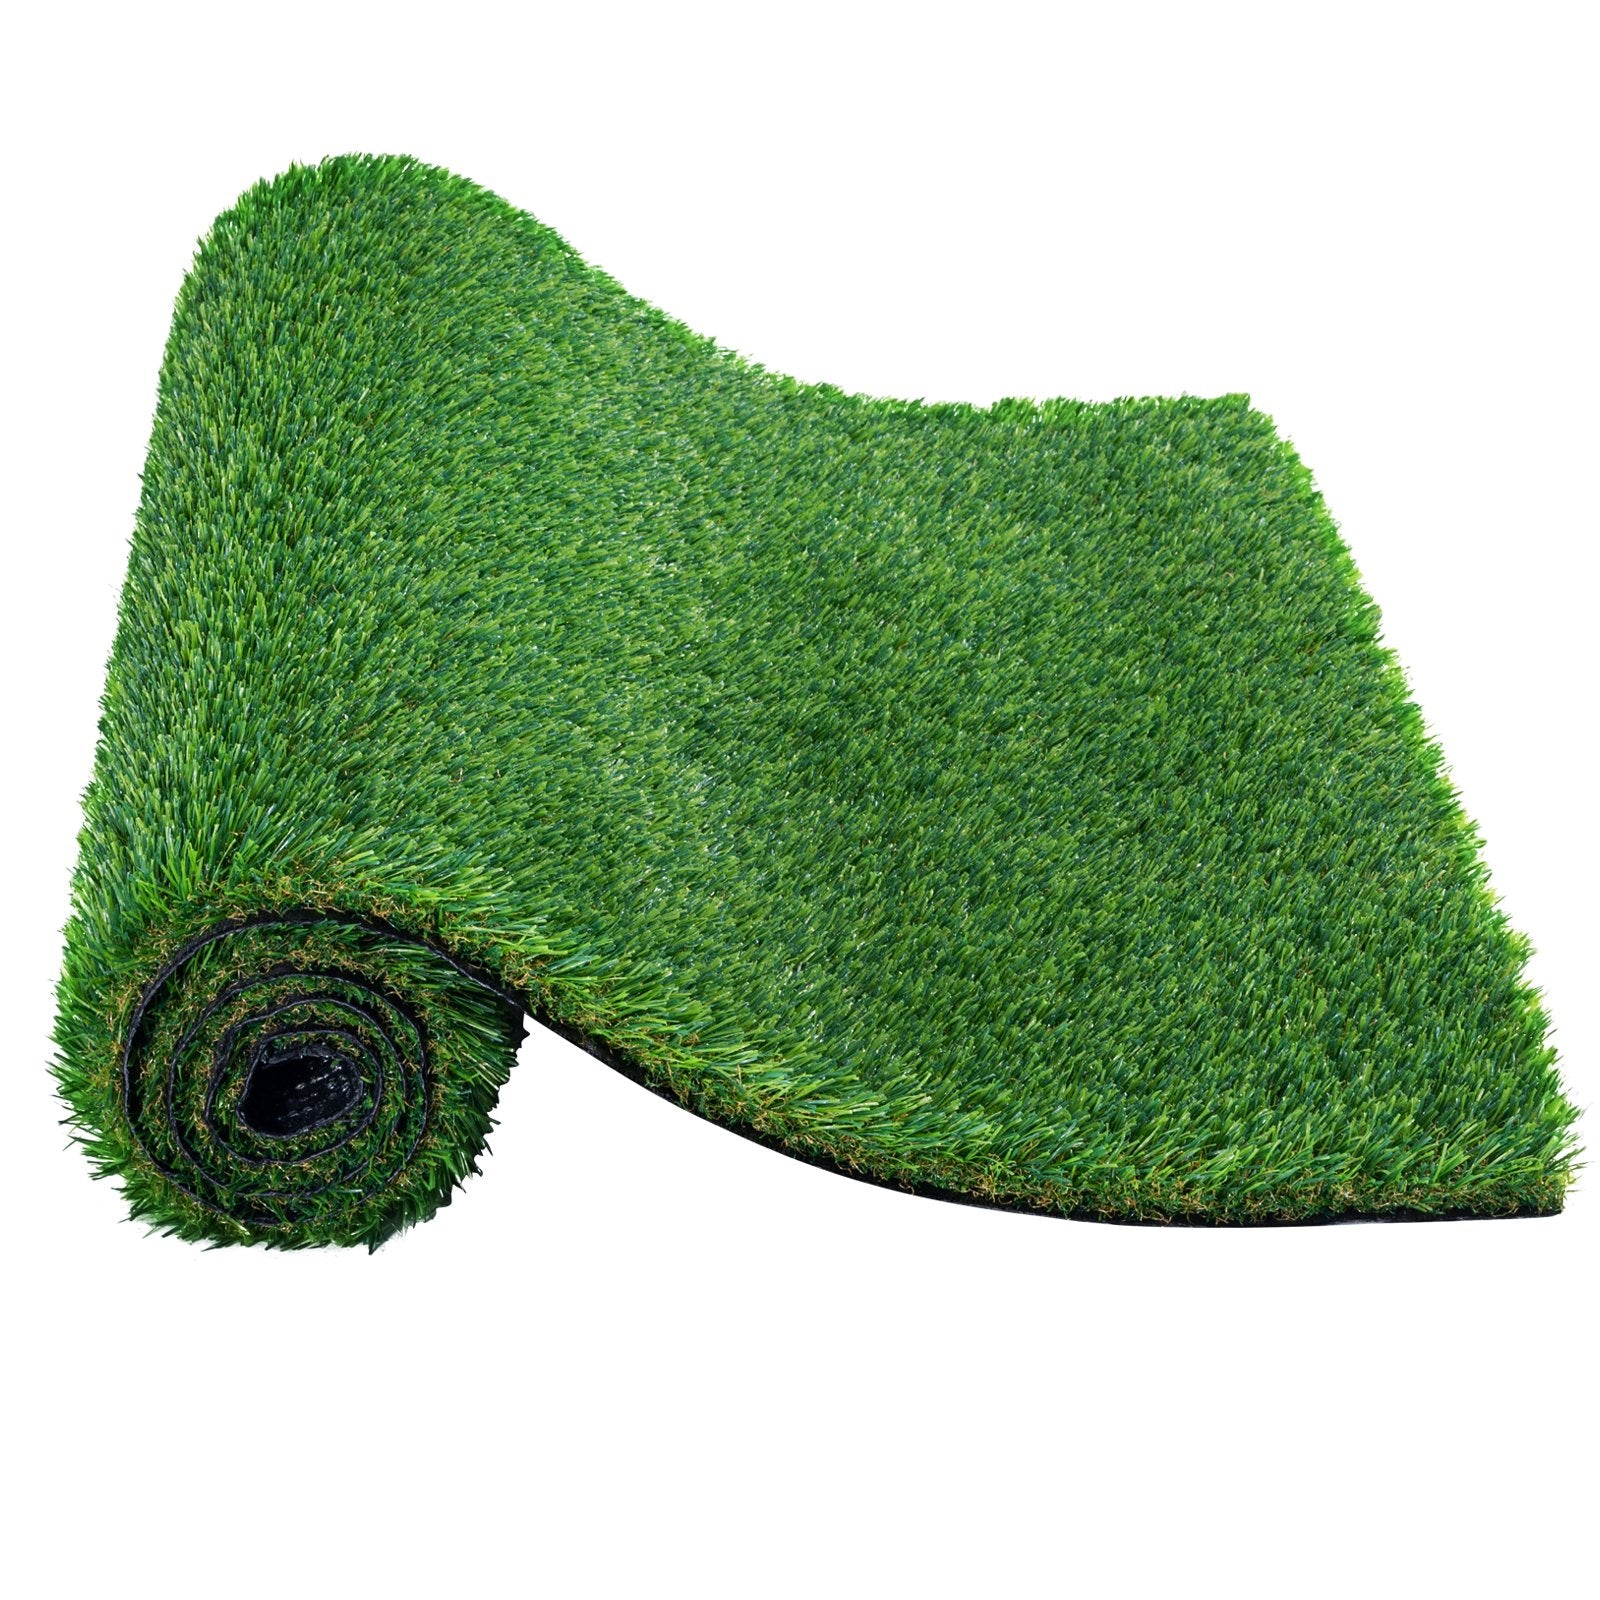 VEVOR Artifical Grass, 5 x 10 ft Rug Green Turf, 1.38"Fake Door Mat Outdoor Patio Lawn Decoration, Easy to Clean with Drainage Holes, Perfect For Multi-Purpose Home Indoor Entryway Scraper Dog Mats-9